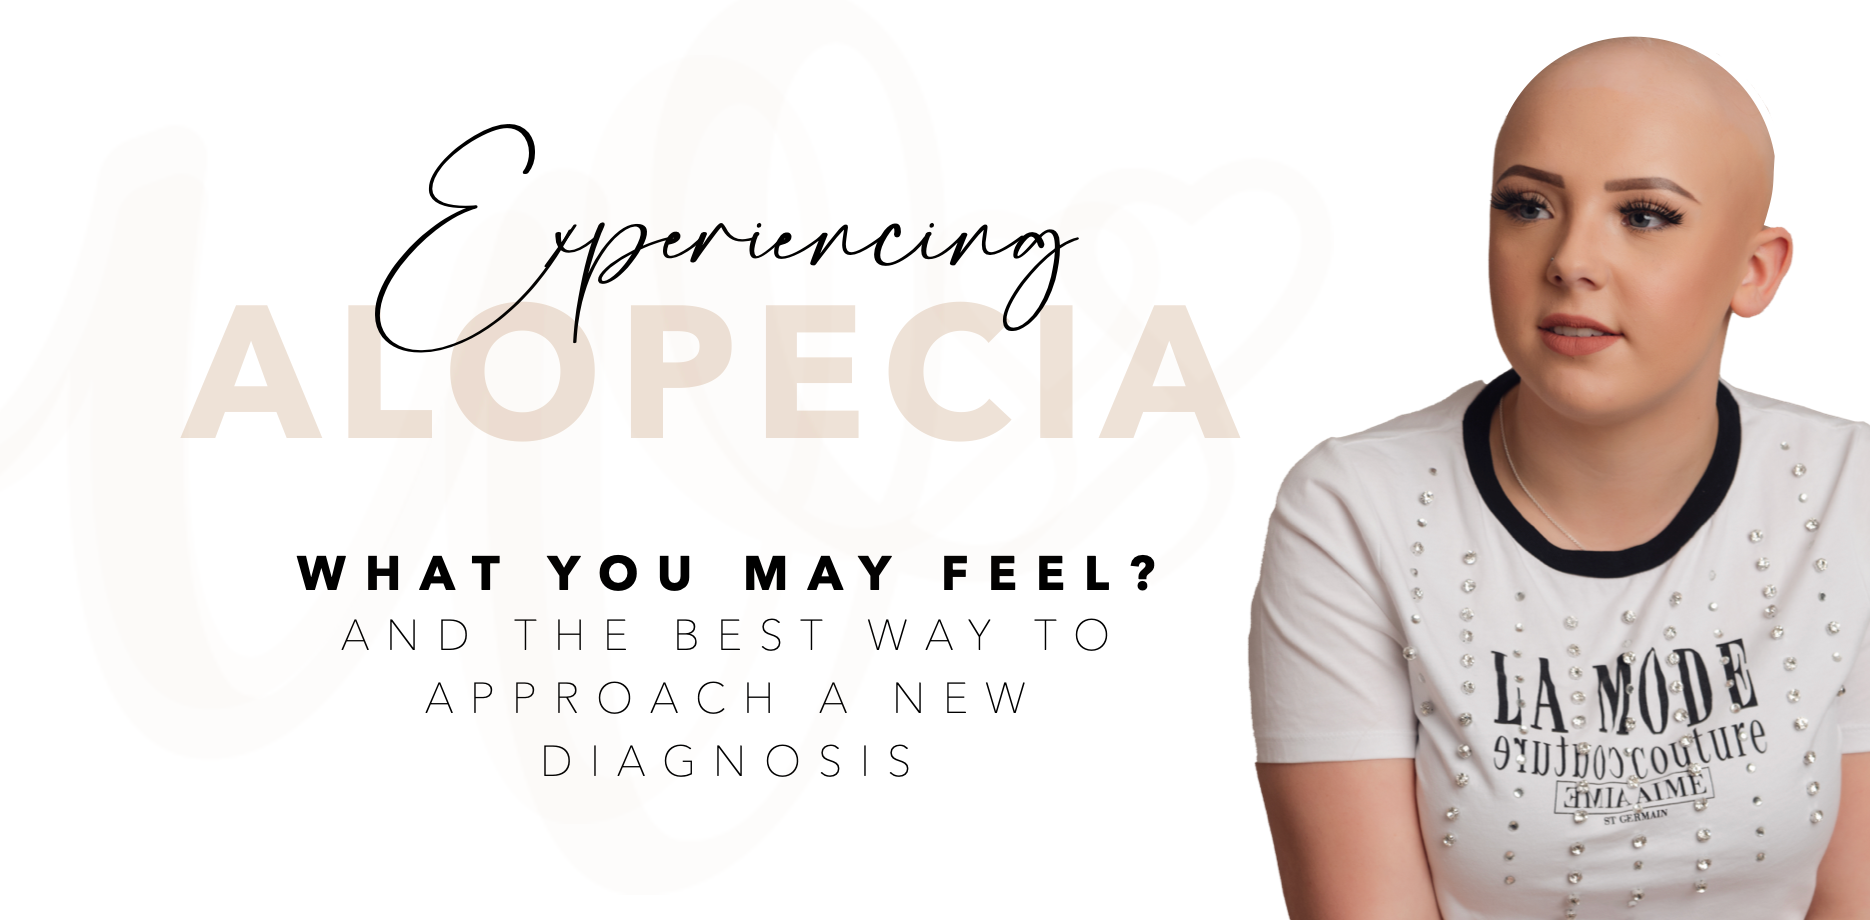 Experiencing Alopecia. What is it and how does it really feel?